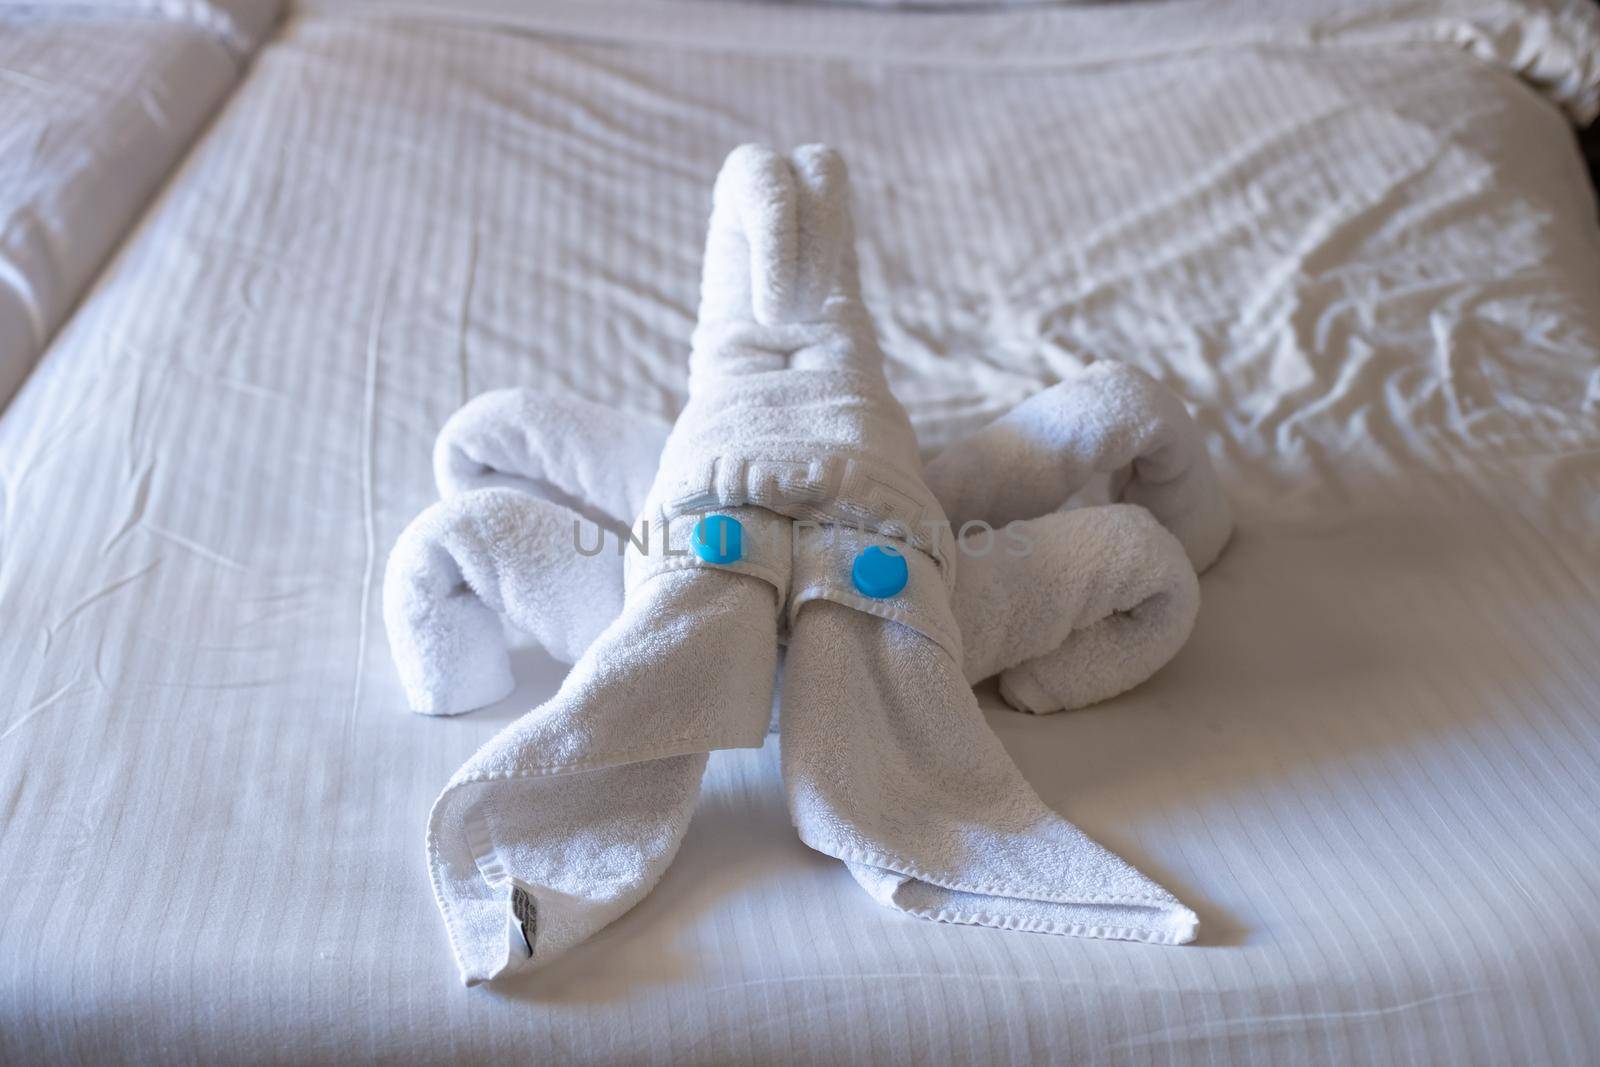 Scorpion figurine made from towels on a bed in a hotel room. by Andelov13